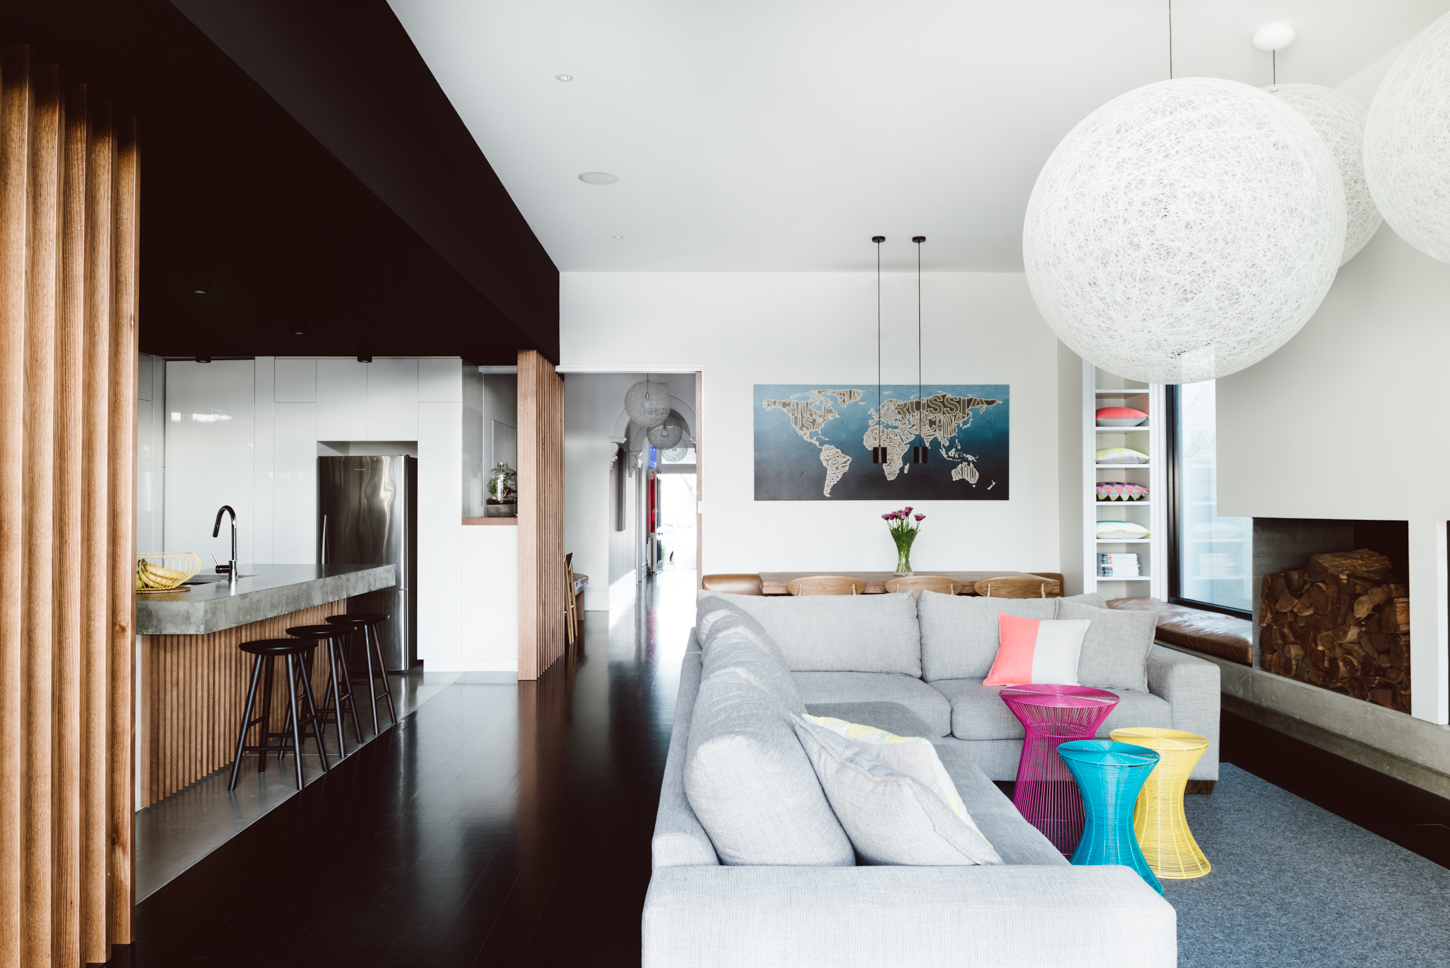 Yarraville – “Surprise Package” as dubbed by Australian House & Garden Magazine